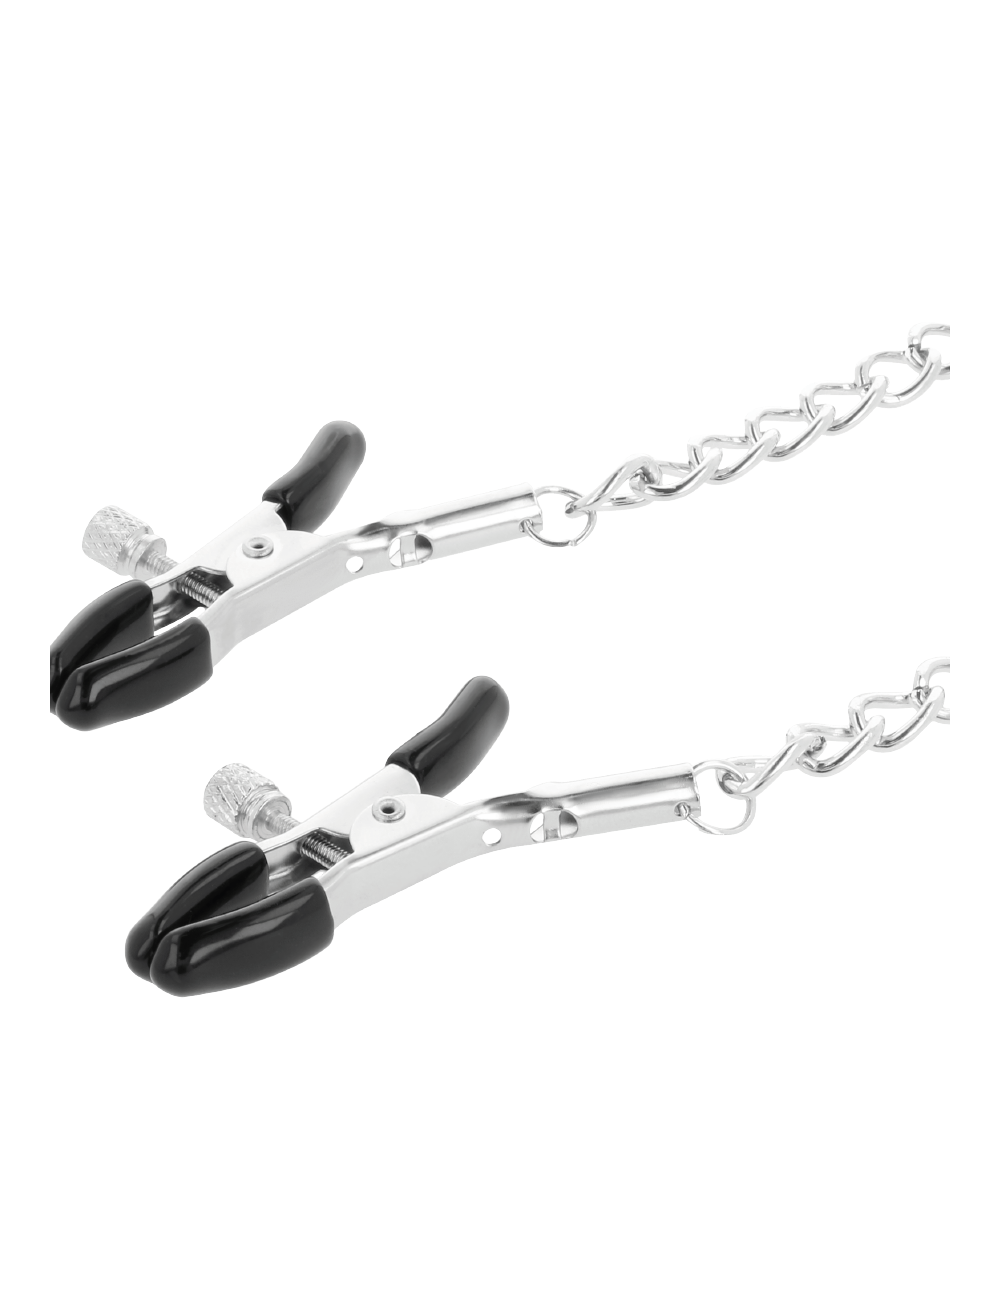 Sextoys - Menottes & accessoires - DARKNESS COLLAR WITH NIPPLE CLAMPS BLACK - Darkness Bondage